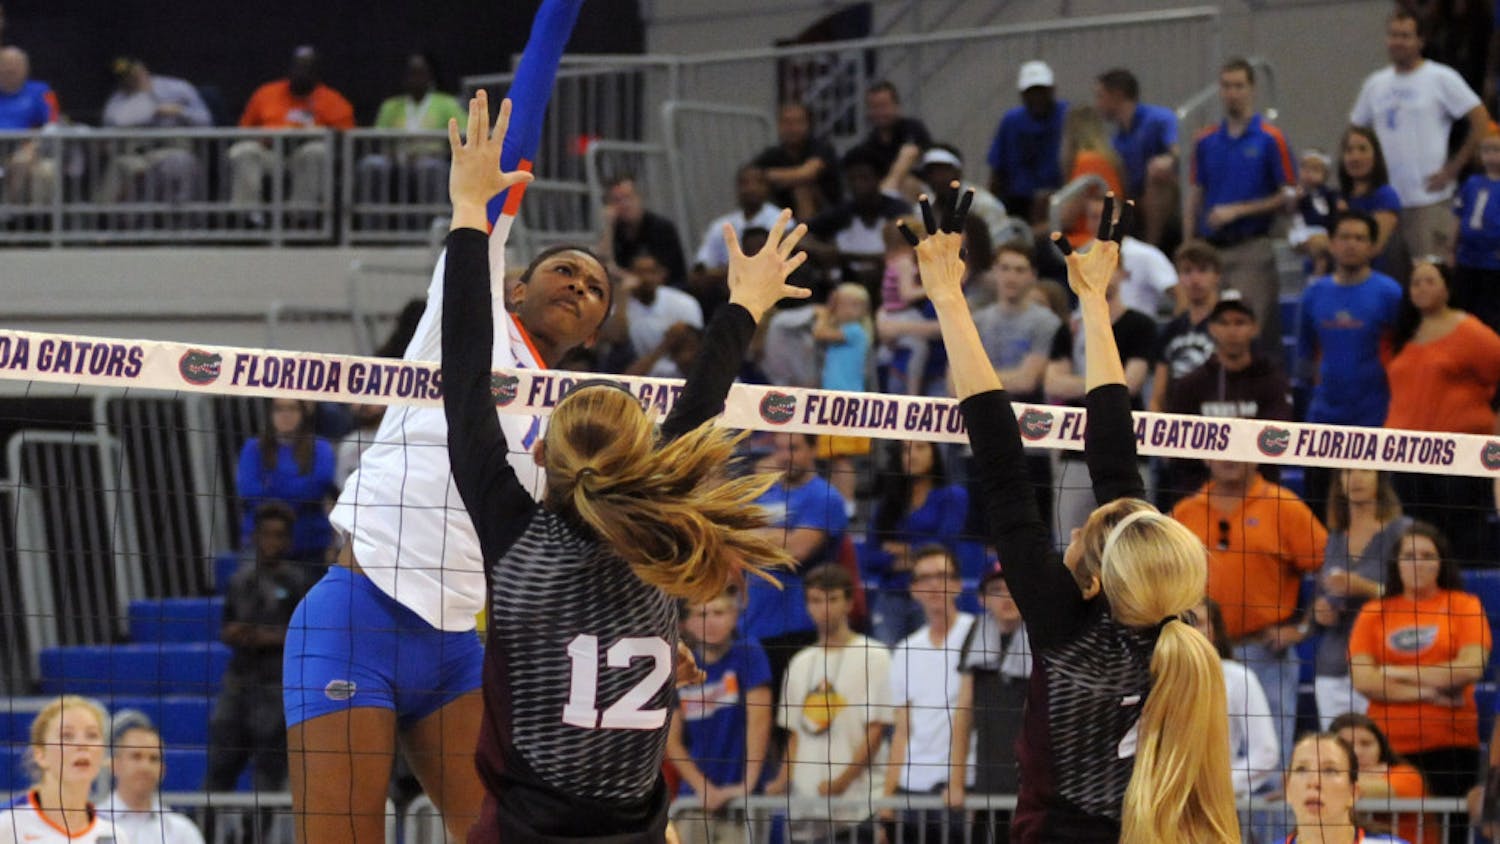 UF middle blocker Rhamat Alhassan swings for a kill during Florida's 3-0 win against Texas A&amp;M on Oct. 9, 2015, in the O'Connell Center.